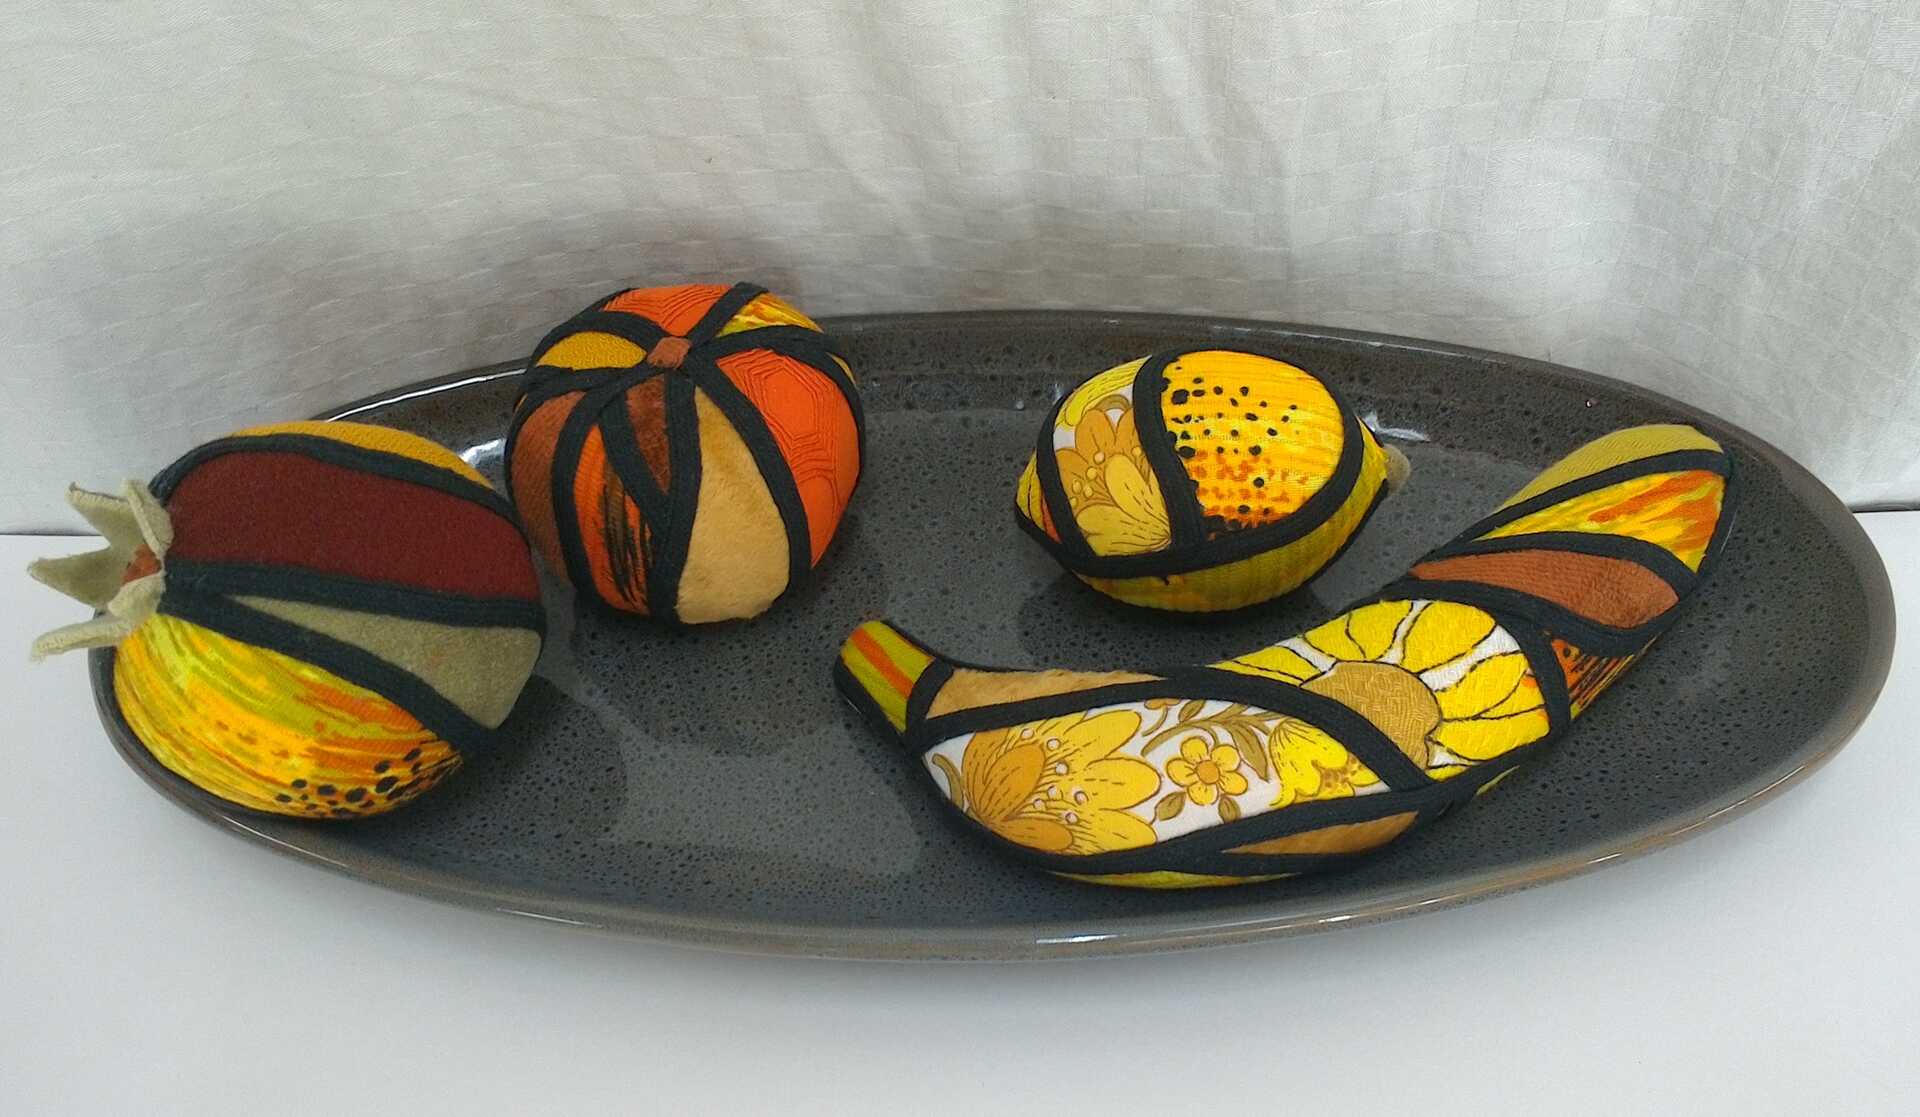 Sculpture 'The Fruit Bowl' by Libby Bloxham. Arranged on an oval platter are four pieces of fruit - including a banana, lemon and orange - covered in swatches of fabric favouring yellow, orange and red tones. The fabric covering is segmented into irregular panels with thick black binding, complimenting the contours of the shape.